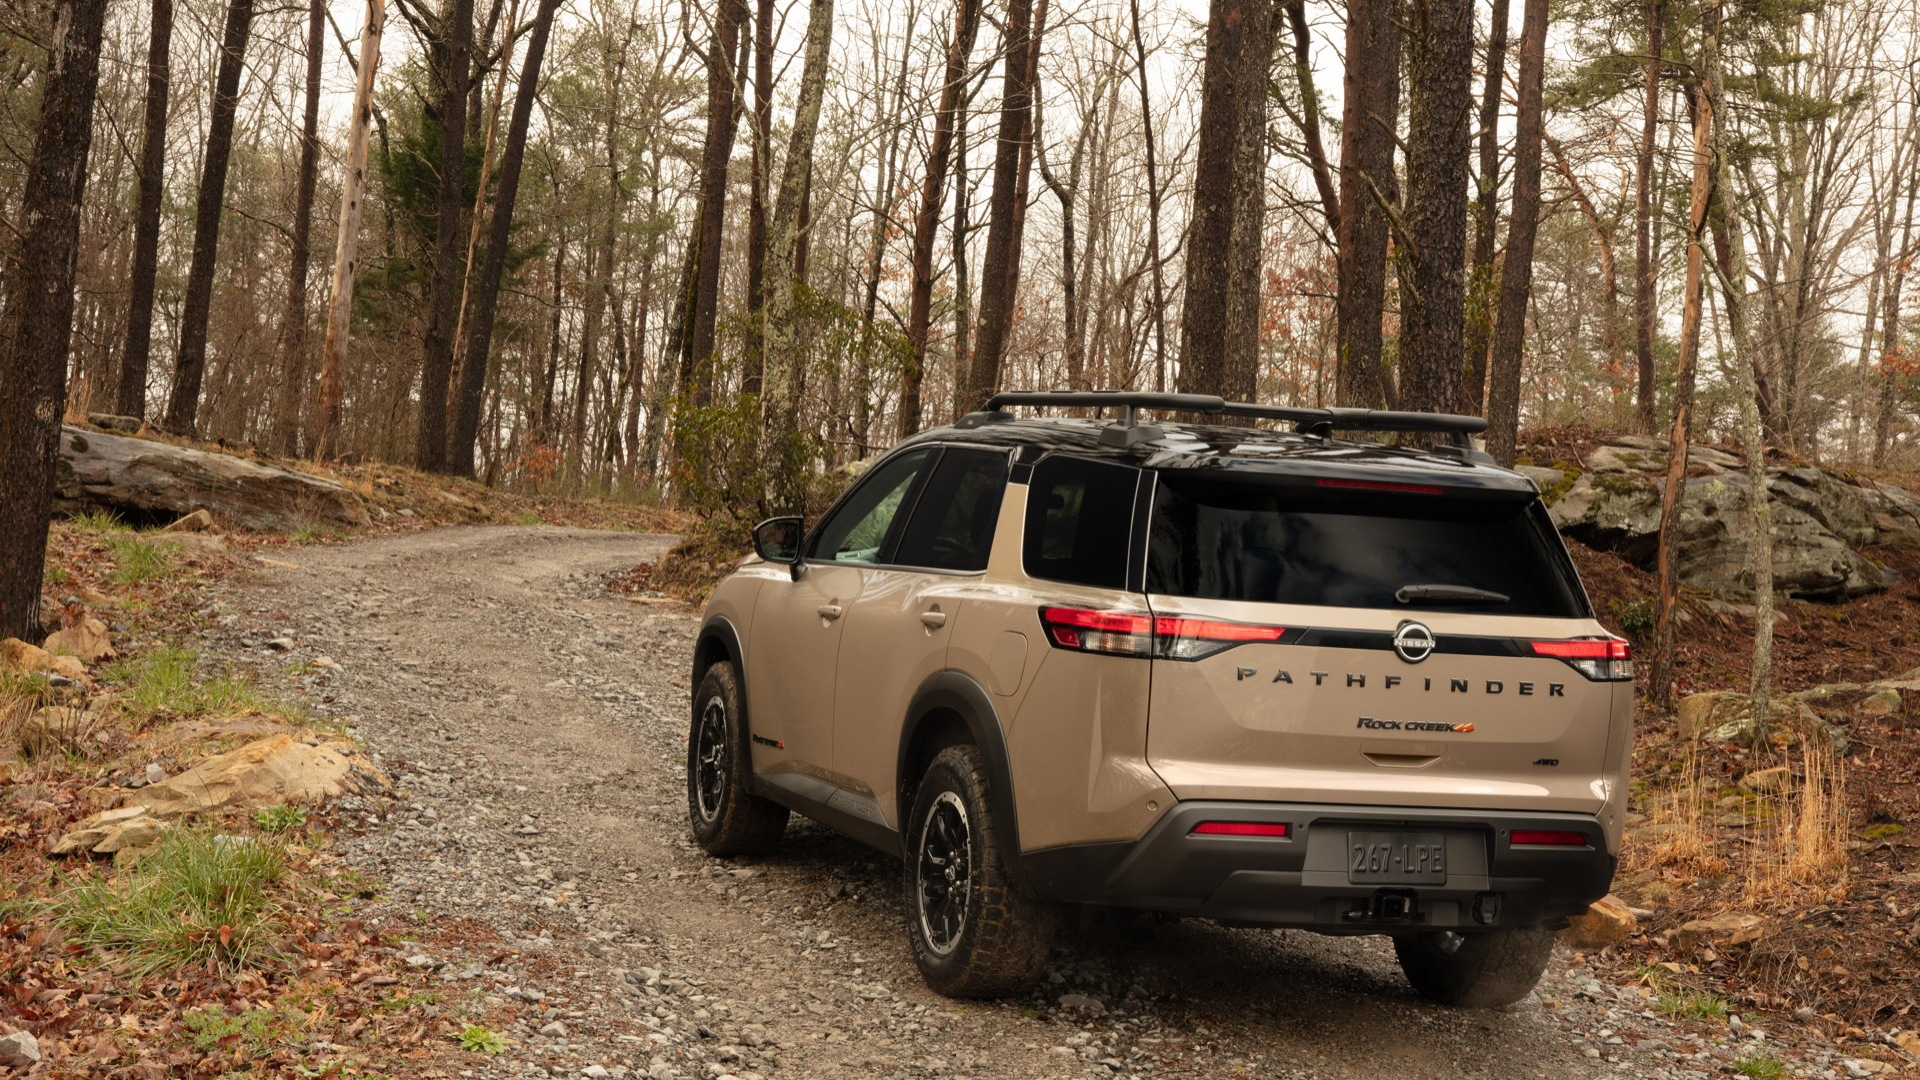 Preview 2023 Nissan Pathfinder Rock Creek adds power, offroad cred